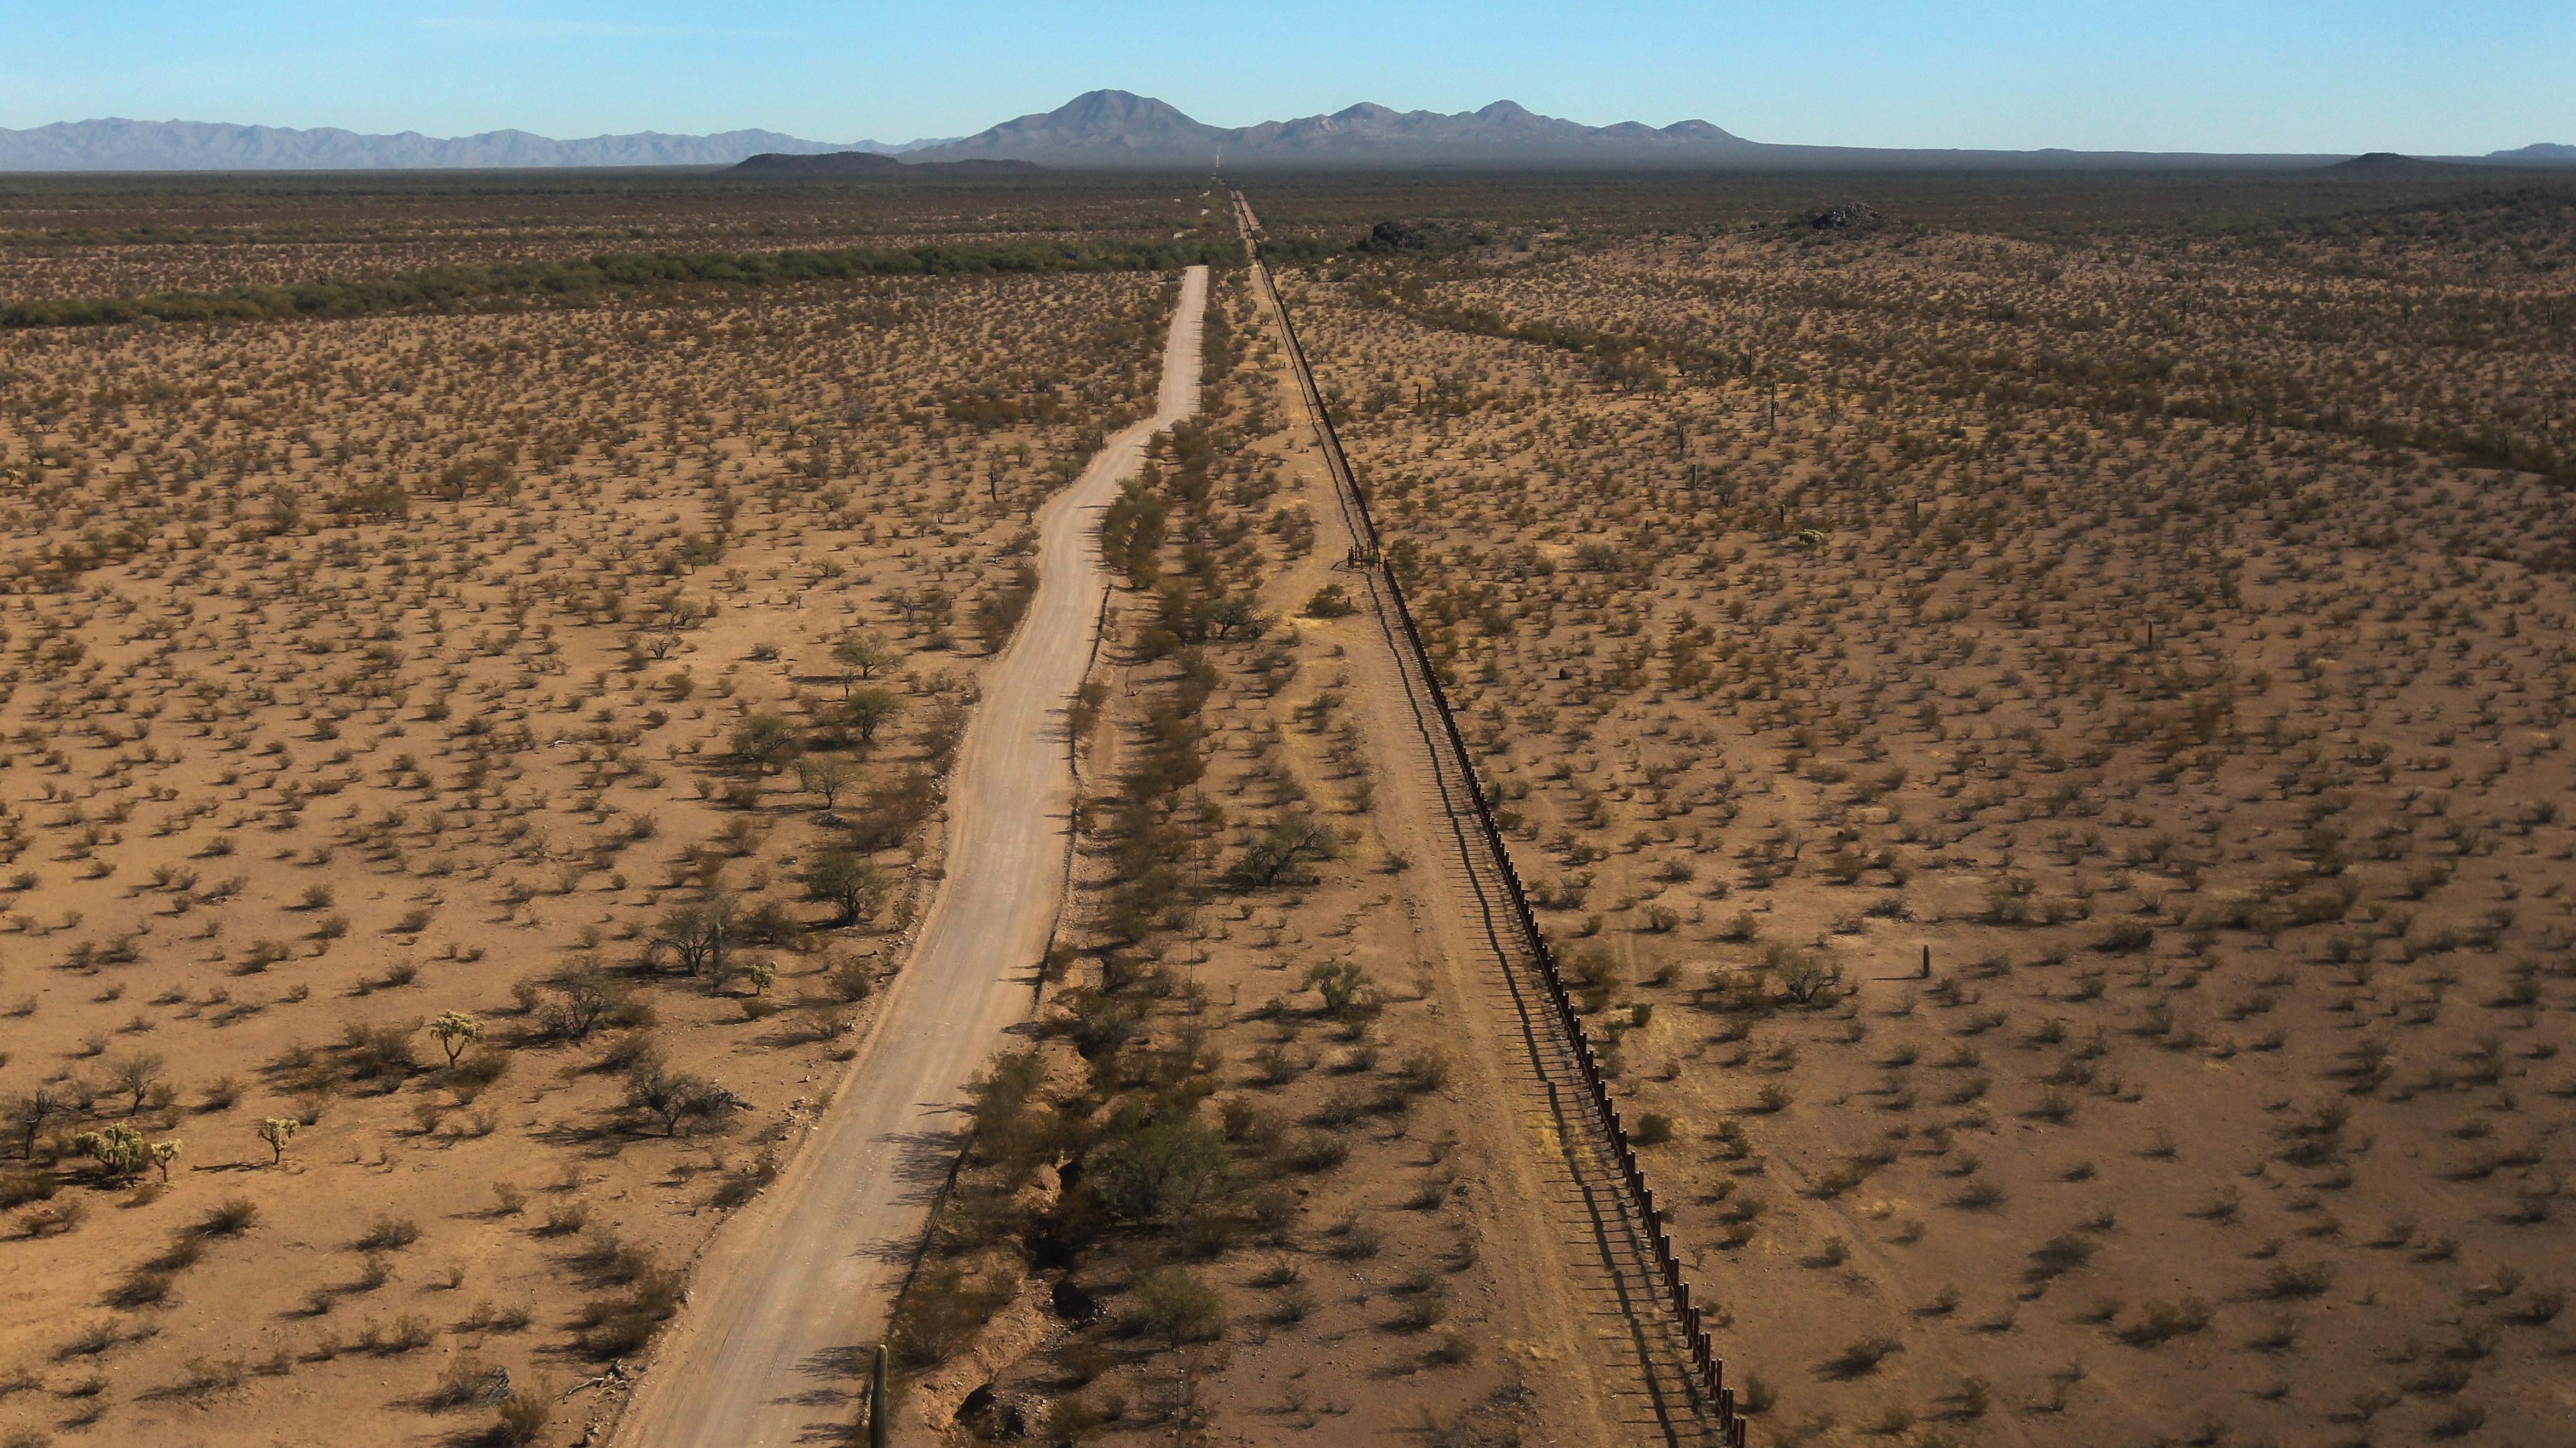 As seen from the air, the U.S.-Mexico border fence (U.S.-L) stretches through the Sonoran Desert on December 9, 2010 in the Tohono O'odham Reservation, Arizona.  (Photo: John Moore, Getty Images)